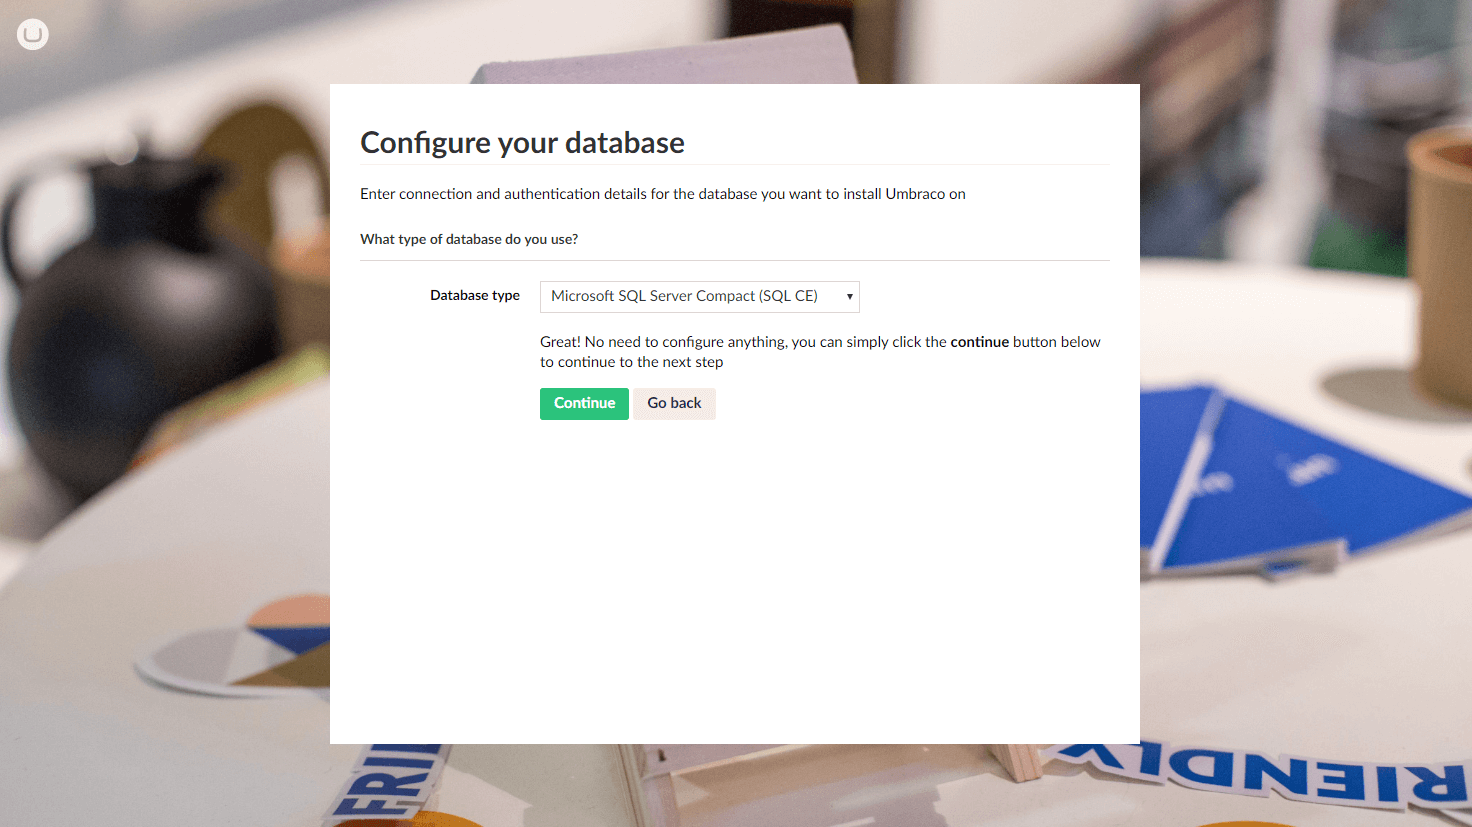 Configure your database for Umbraco.